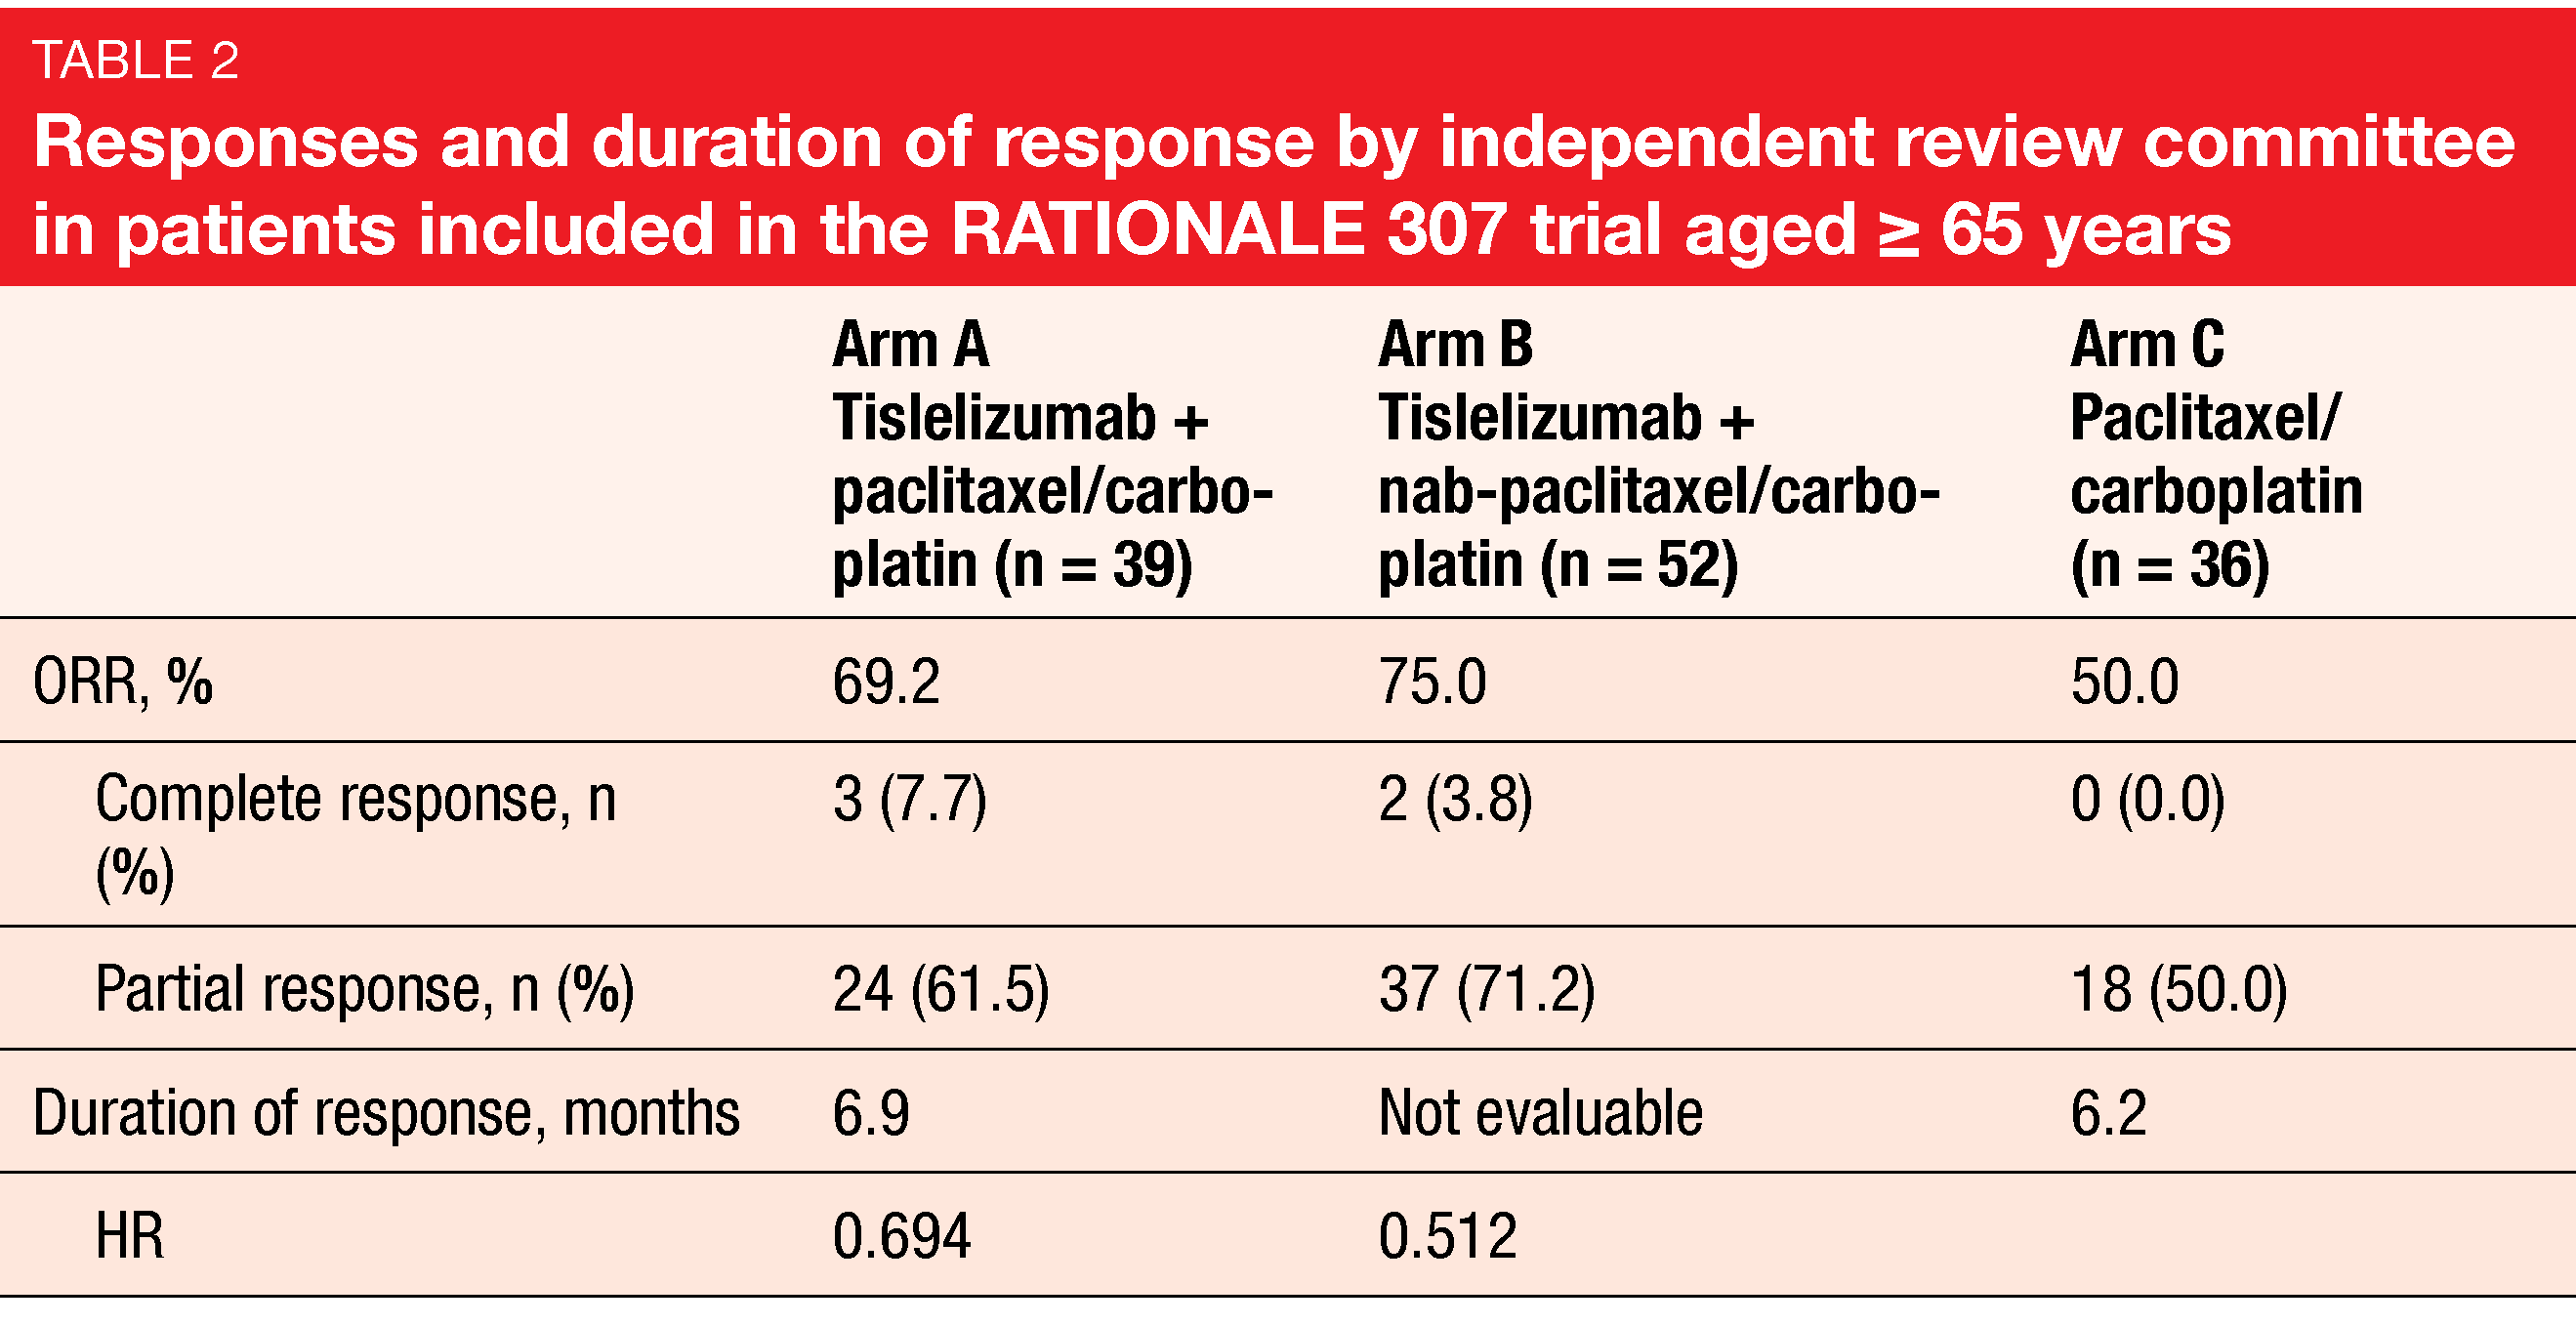 Table 2 Responses and duration of response by independent review committee in patients included in the RATIONALE 307 trial aged ≥ 65 years